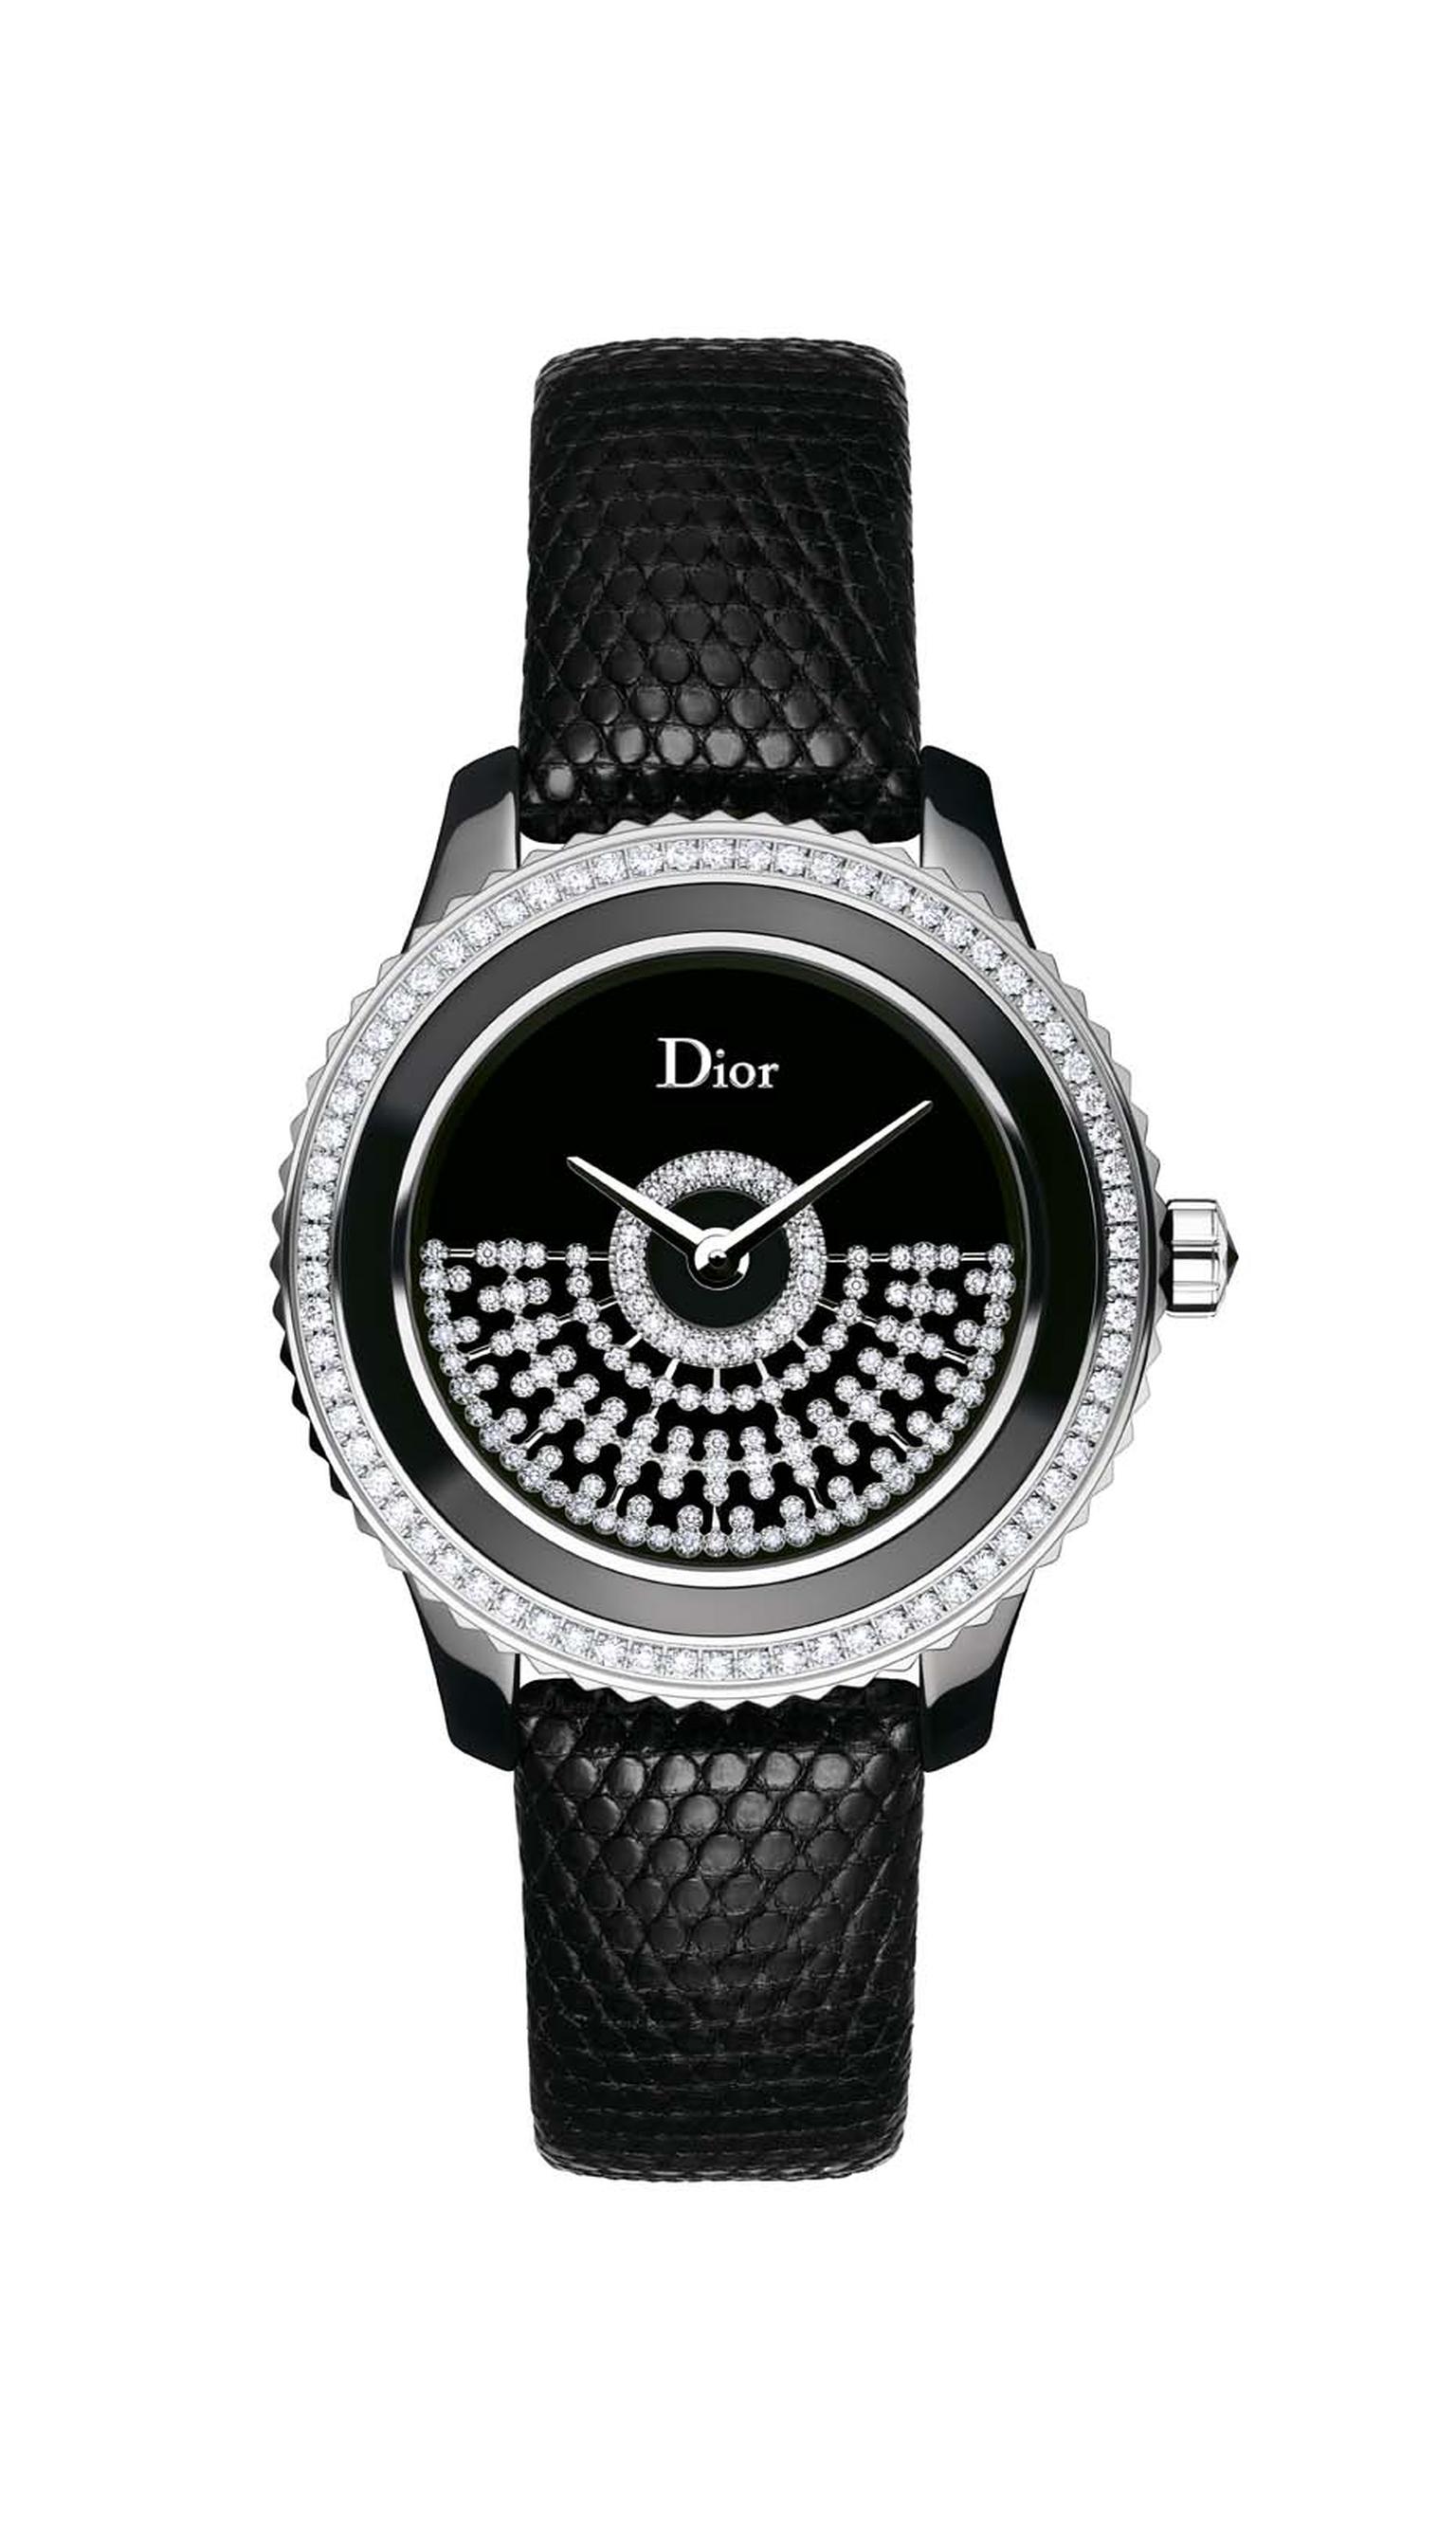 Dior VIII Grand Bal Résille watch comes in a 33 or 38mm diameter black ceramic and steel case. The black Vietnamese mother-of-pearl dial features an openwork white gold oscillating weight set with a pattern of diamond netting. Both sizes of the watch are 